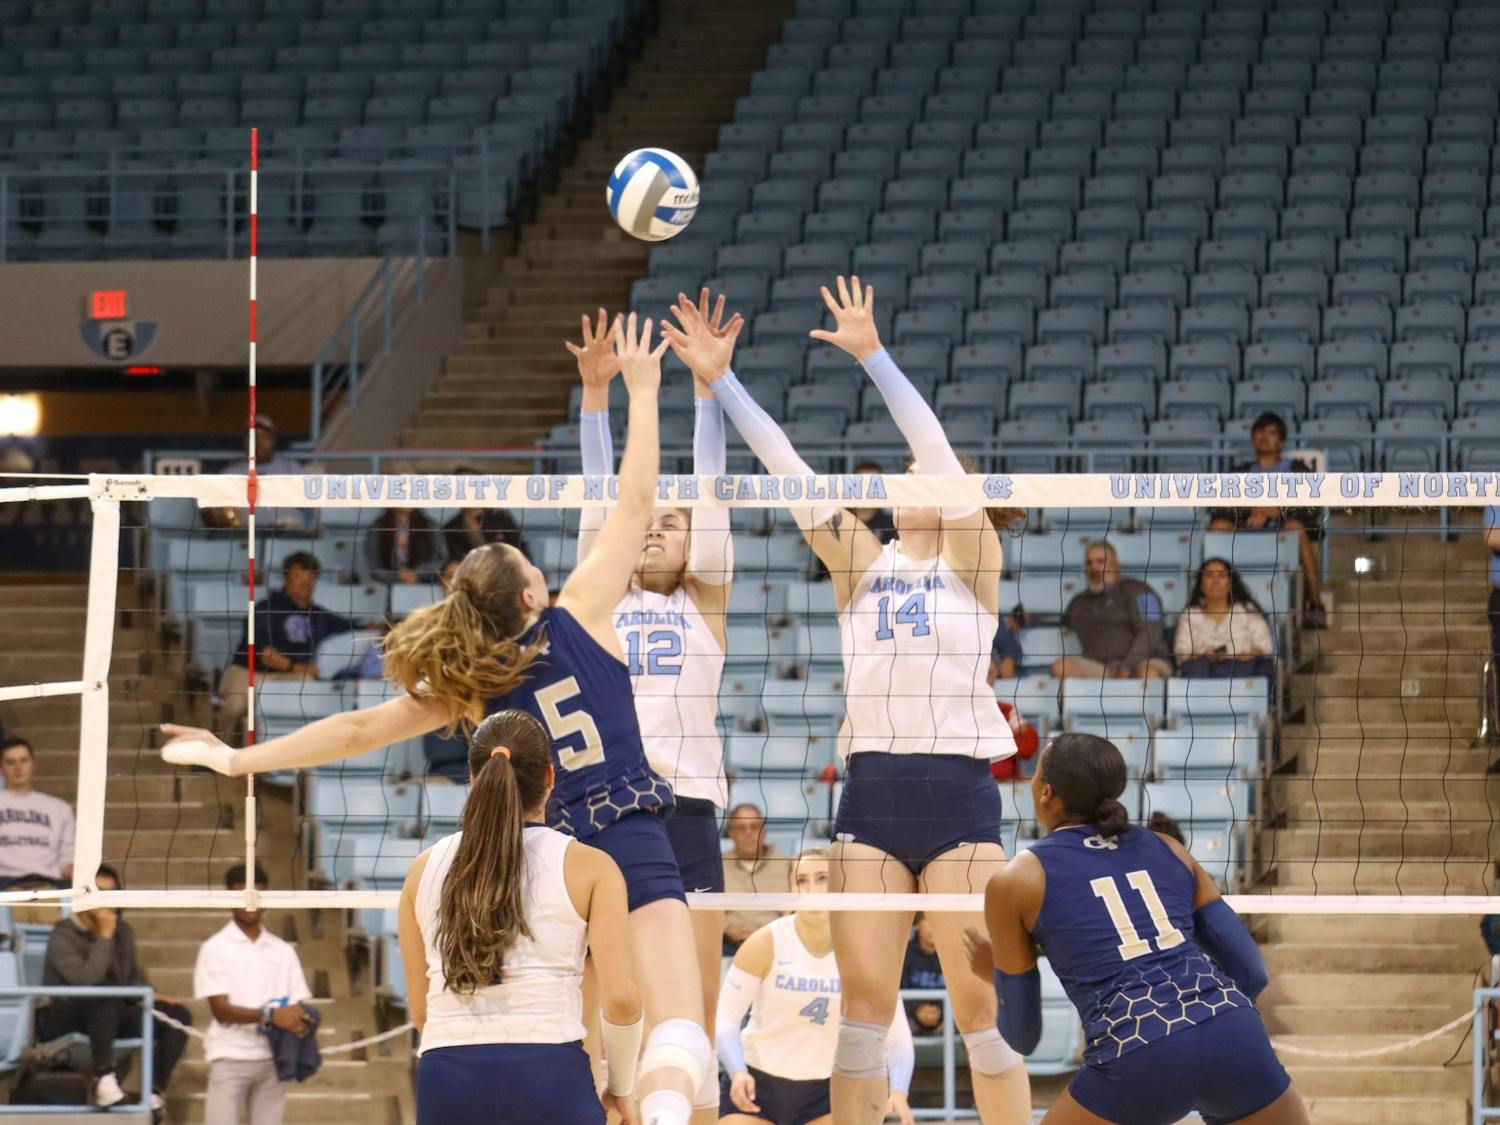 UNC freshman setter Anita Babic (12) and junior middle hitter Kaya Merkler (14) block the ball during the volleyball match against Georgia Tech on Friday, Oct. 28, 2022 at Carmichael Arena. UNC lost 3-1.